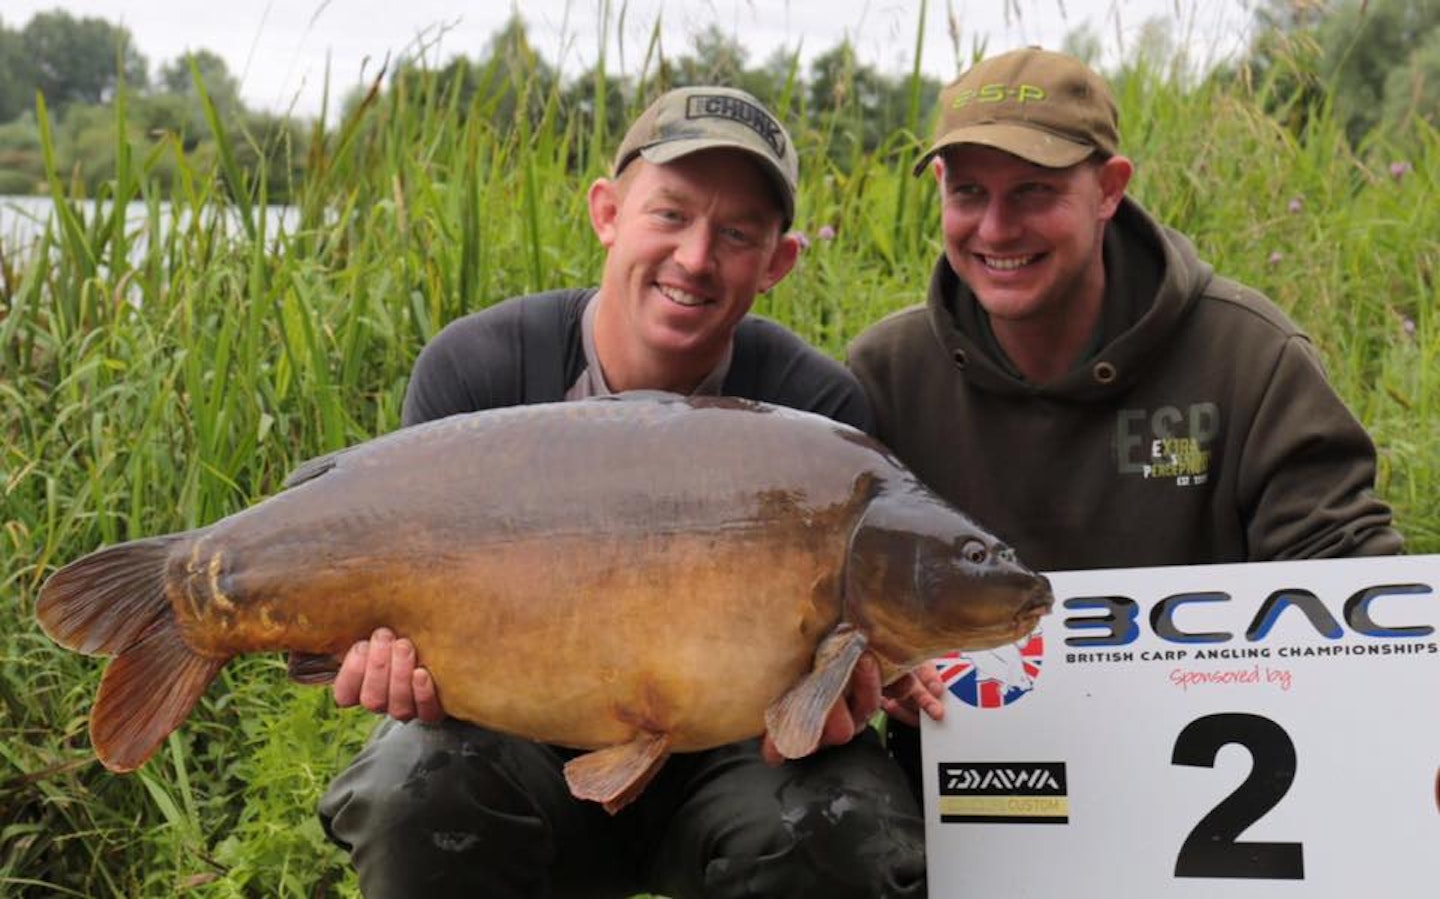 The British Carp Angling Champs 2021 Shield Pairs match sold out in seconds!